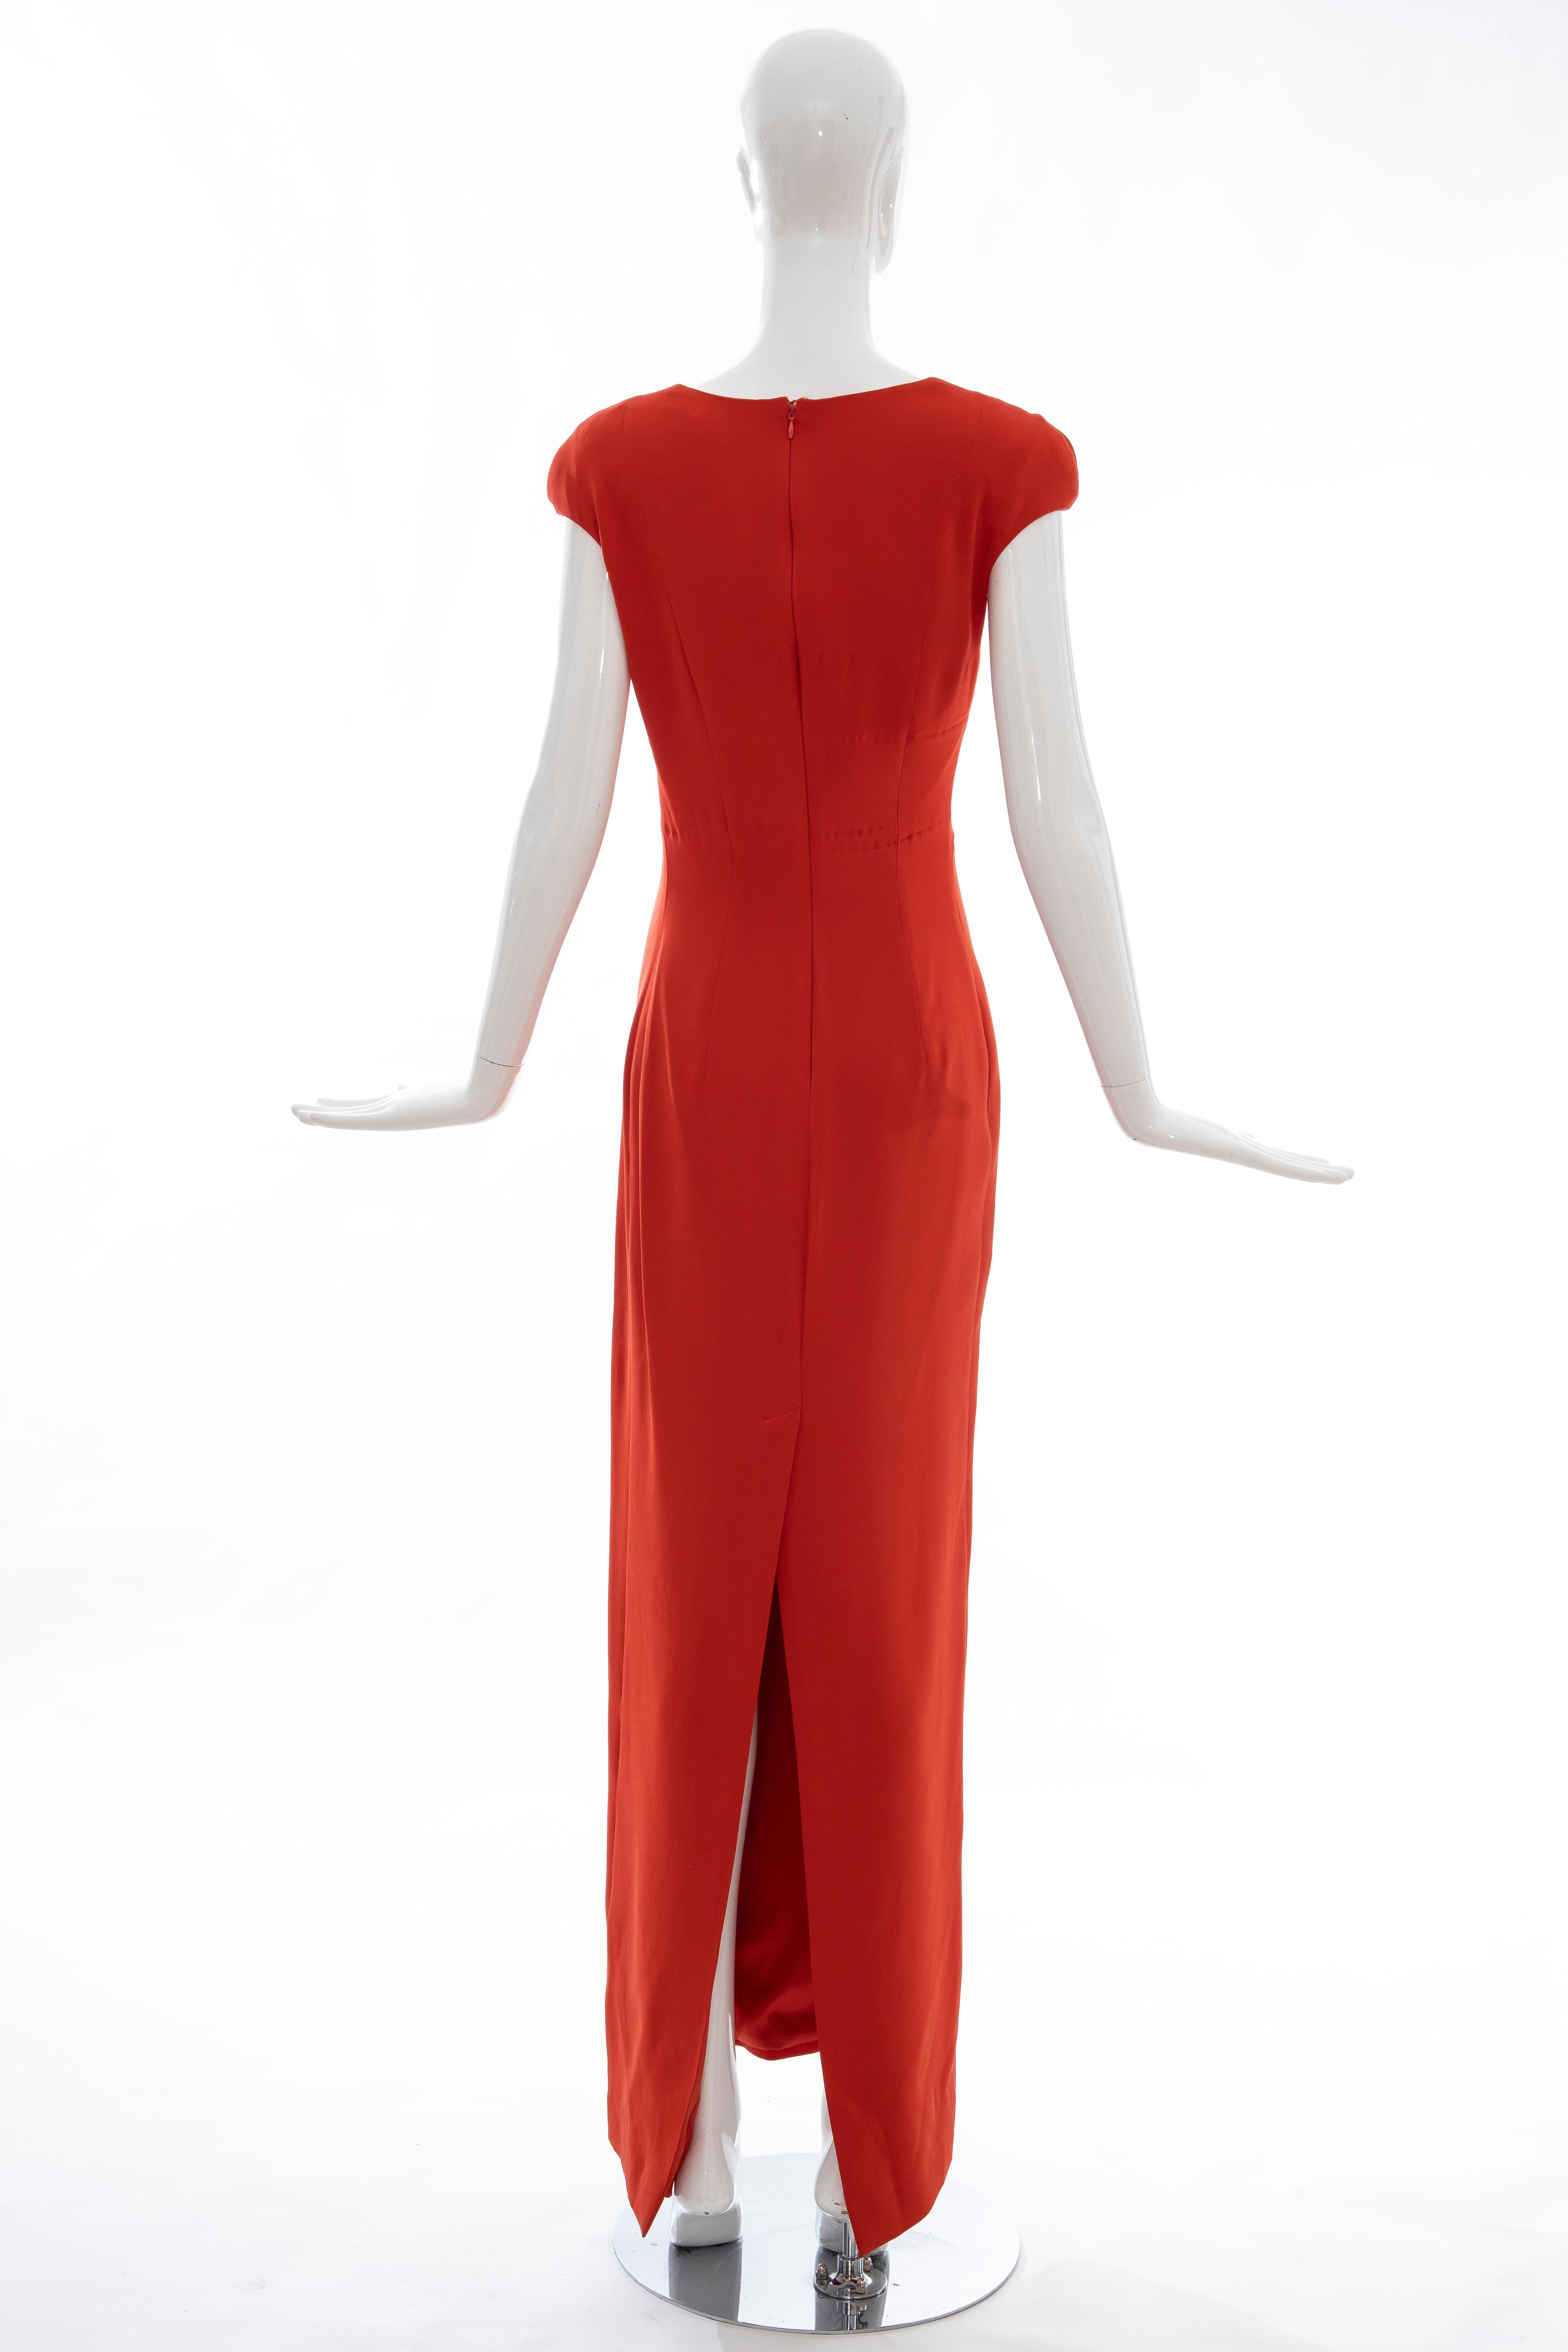 Tom Ford Runway Silk Persimmon Evening Dress With Cape, Fall 2012 10